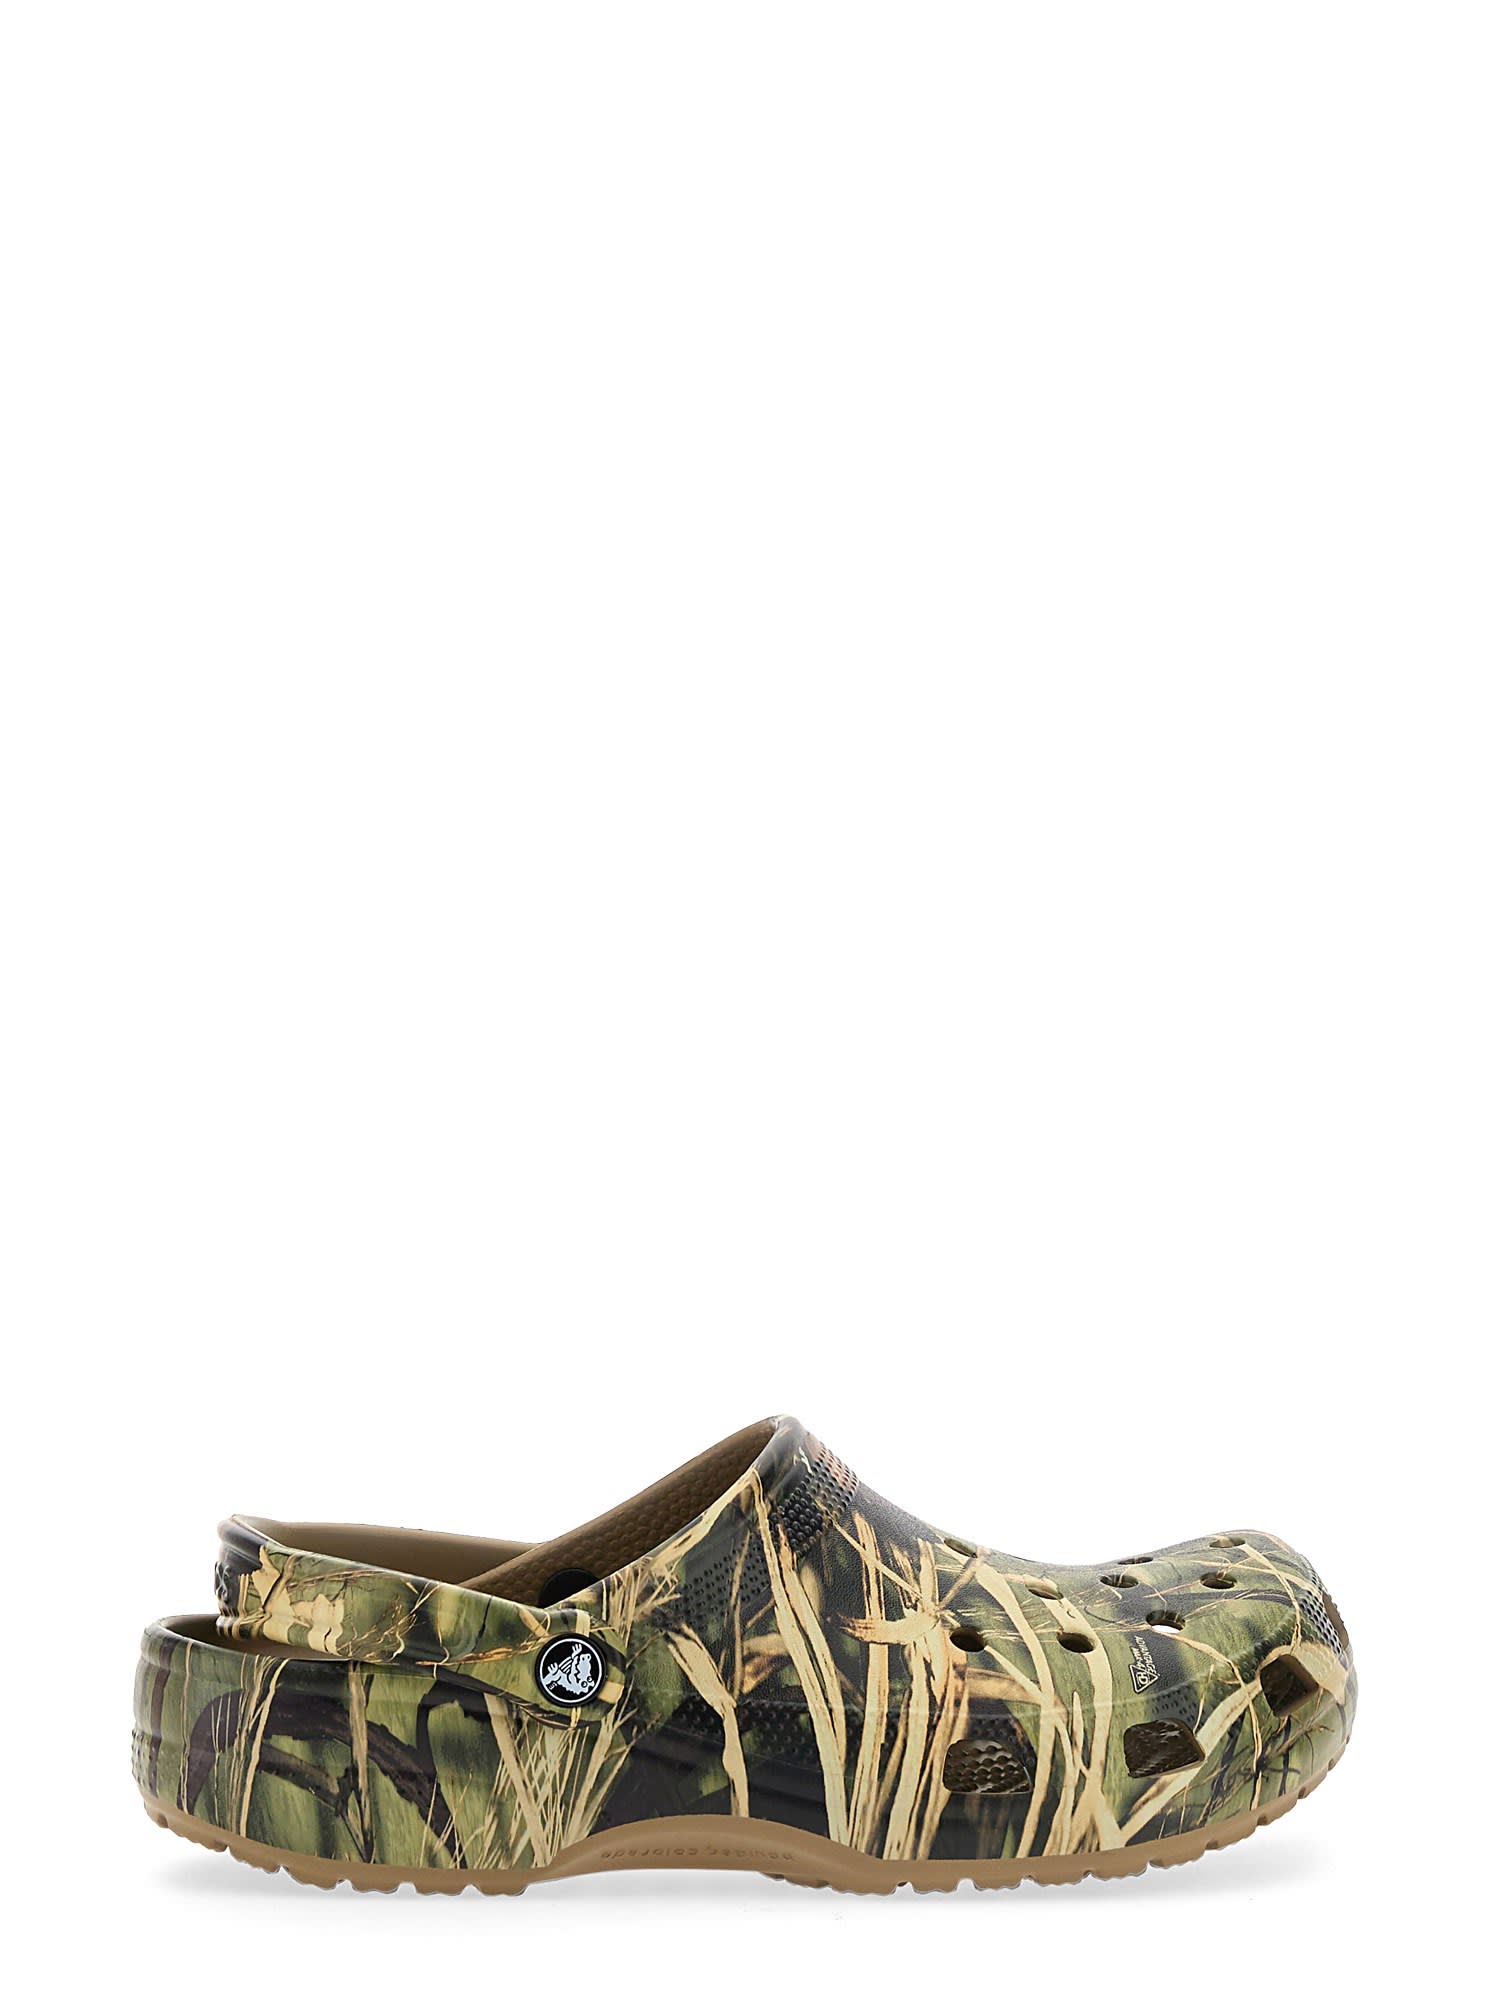 Crocs Clog With Camouflage Print In Multi